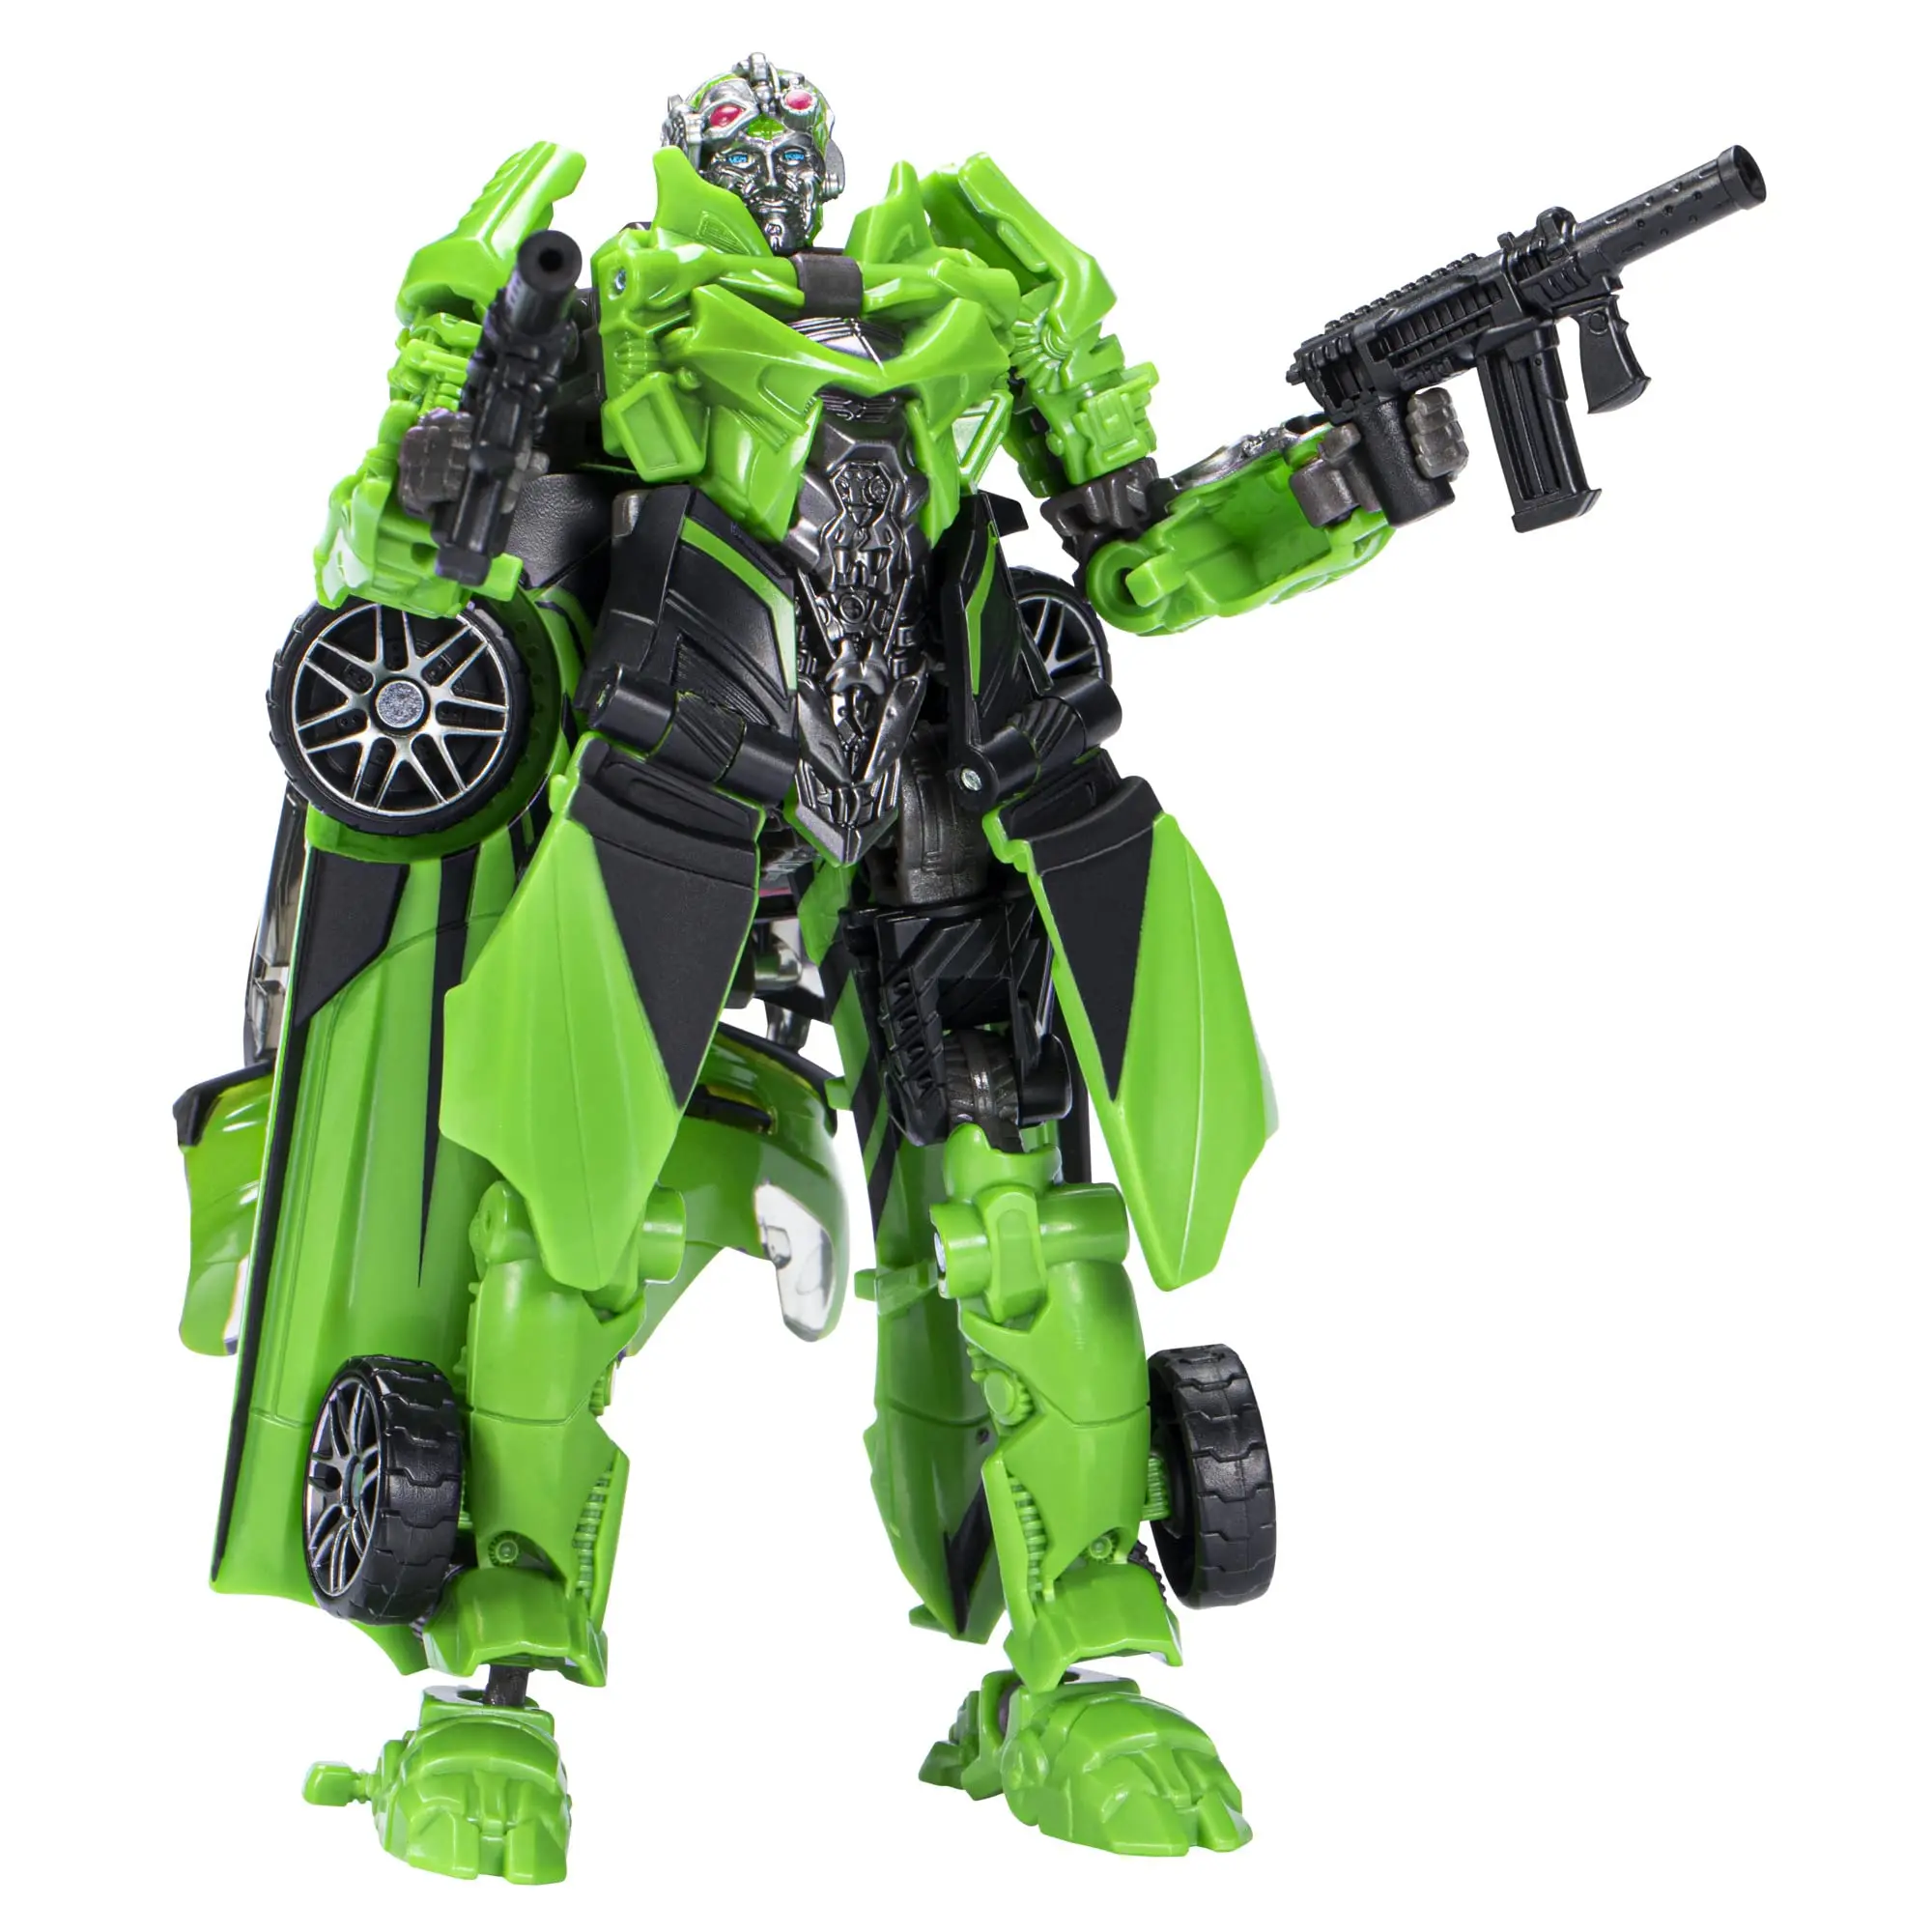 

Transformers Toys Studio Series 93 Deluxe Class The Last Knight Autobot Hot Rod Action Figure - Ages 8 and Up, 4.5-Inch